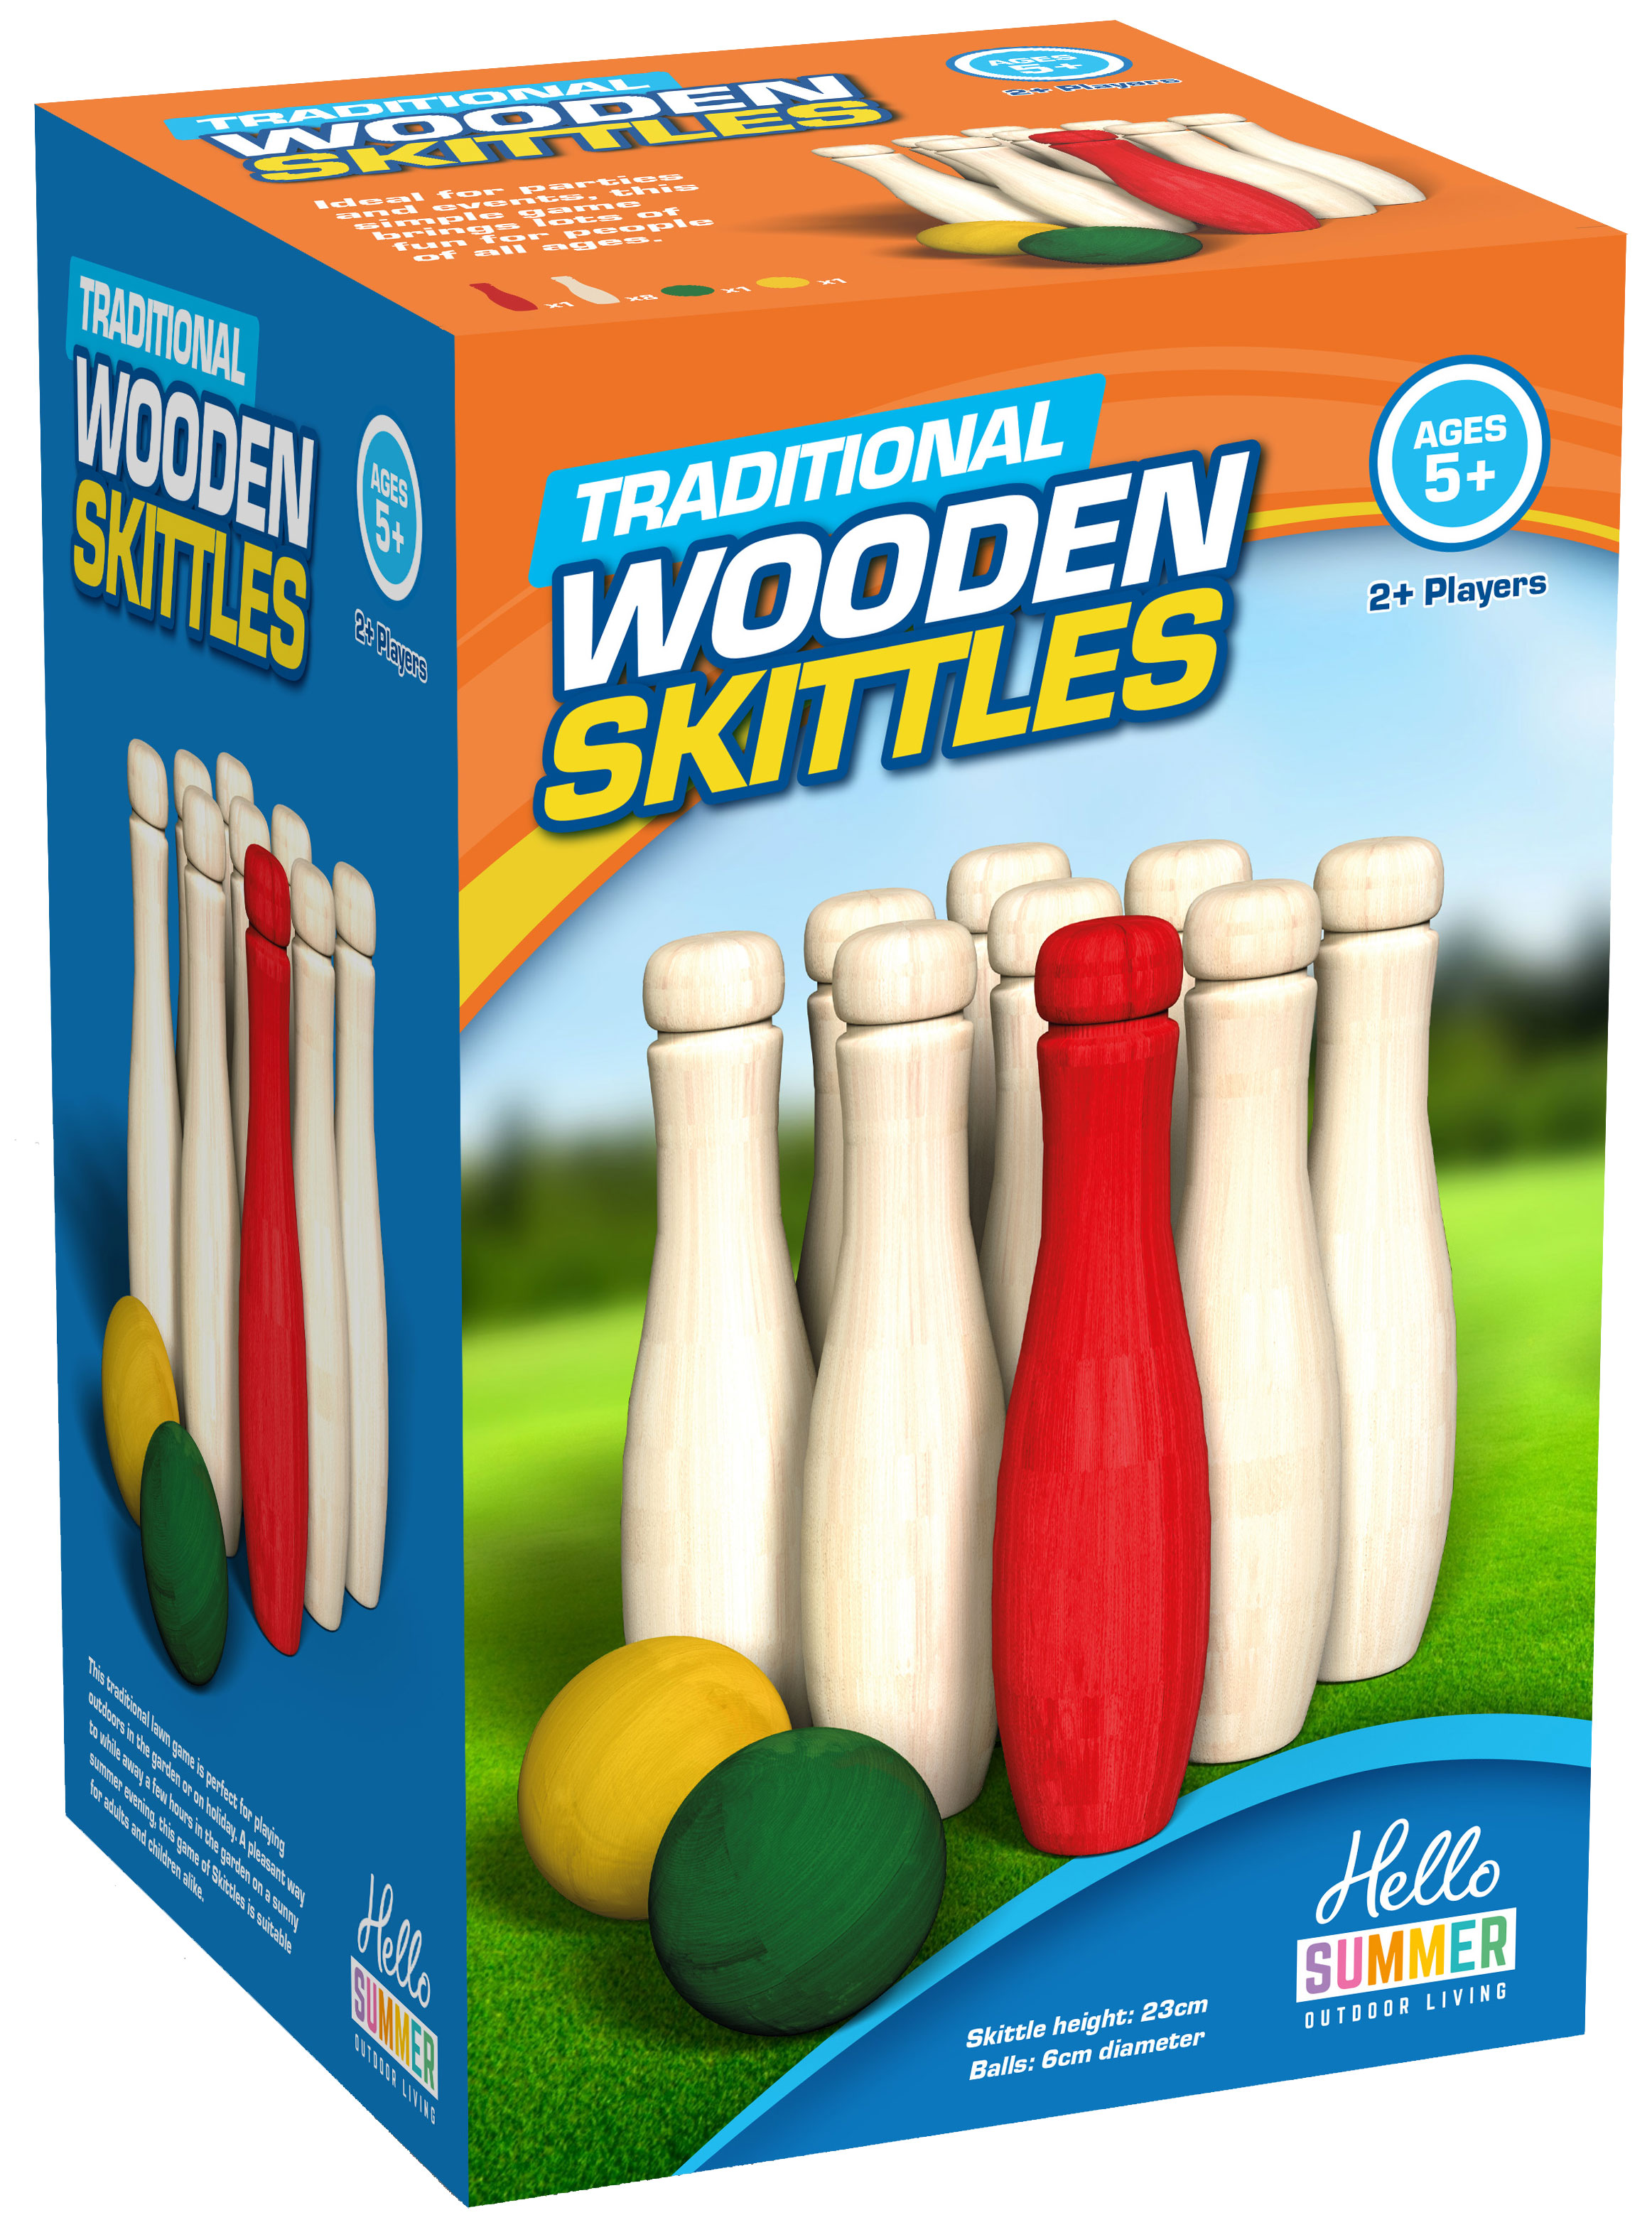 Wooden Skittles Garden Game Outdoor Indoor Skittle Bowls Pin Bowling Large Size 5050796005494 Ebay 4549